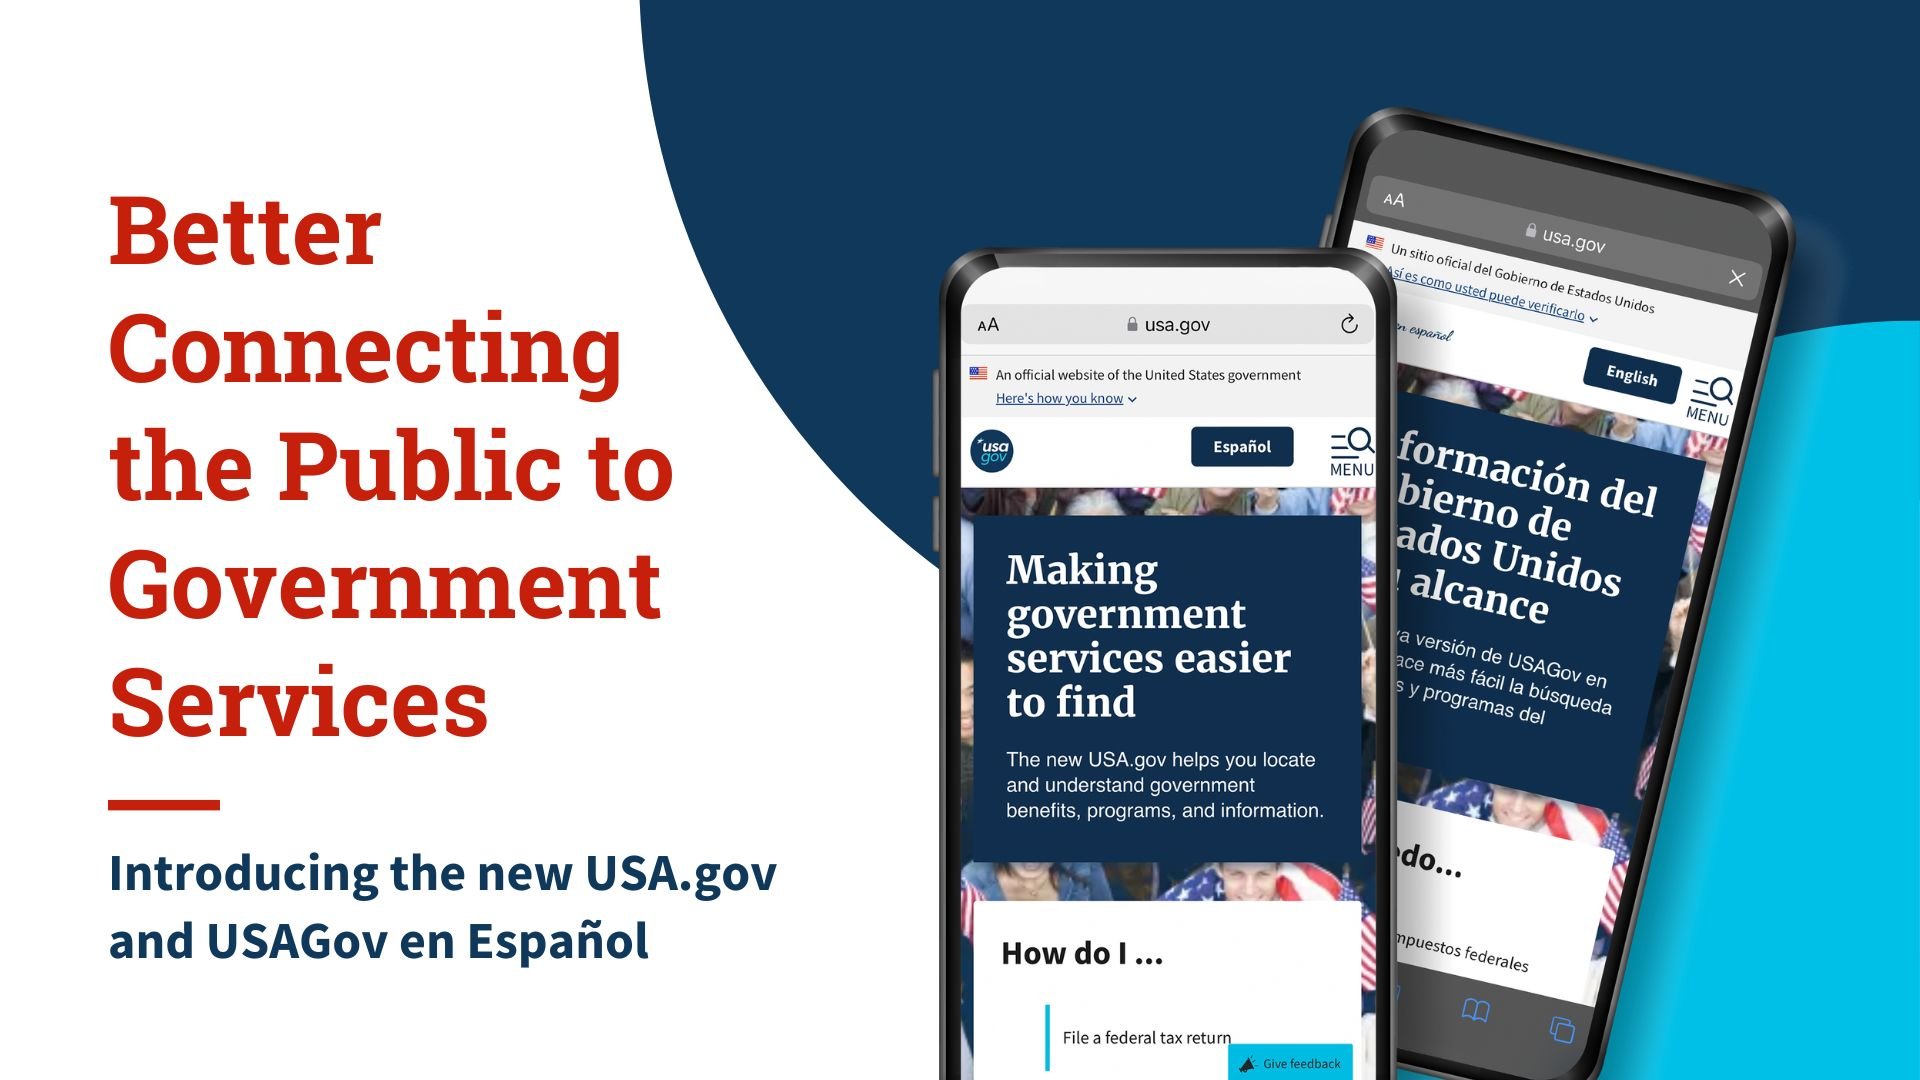 Better Connecting the Public to Government services, Introducing the new USA.gov and USAGov en Español. Two phones showing the mobile versions of USA.gov and USA.gov/es/